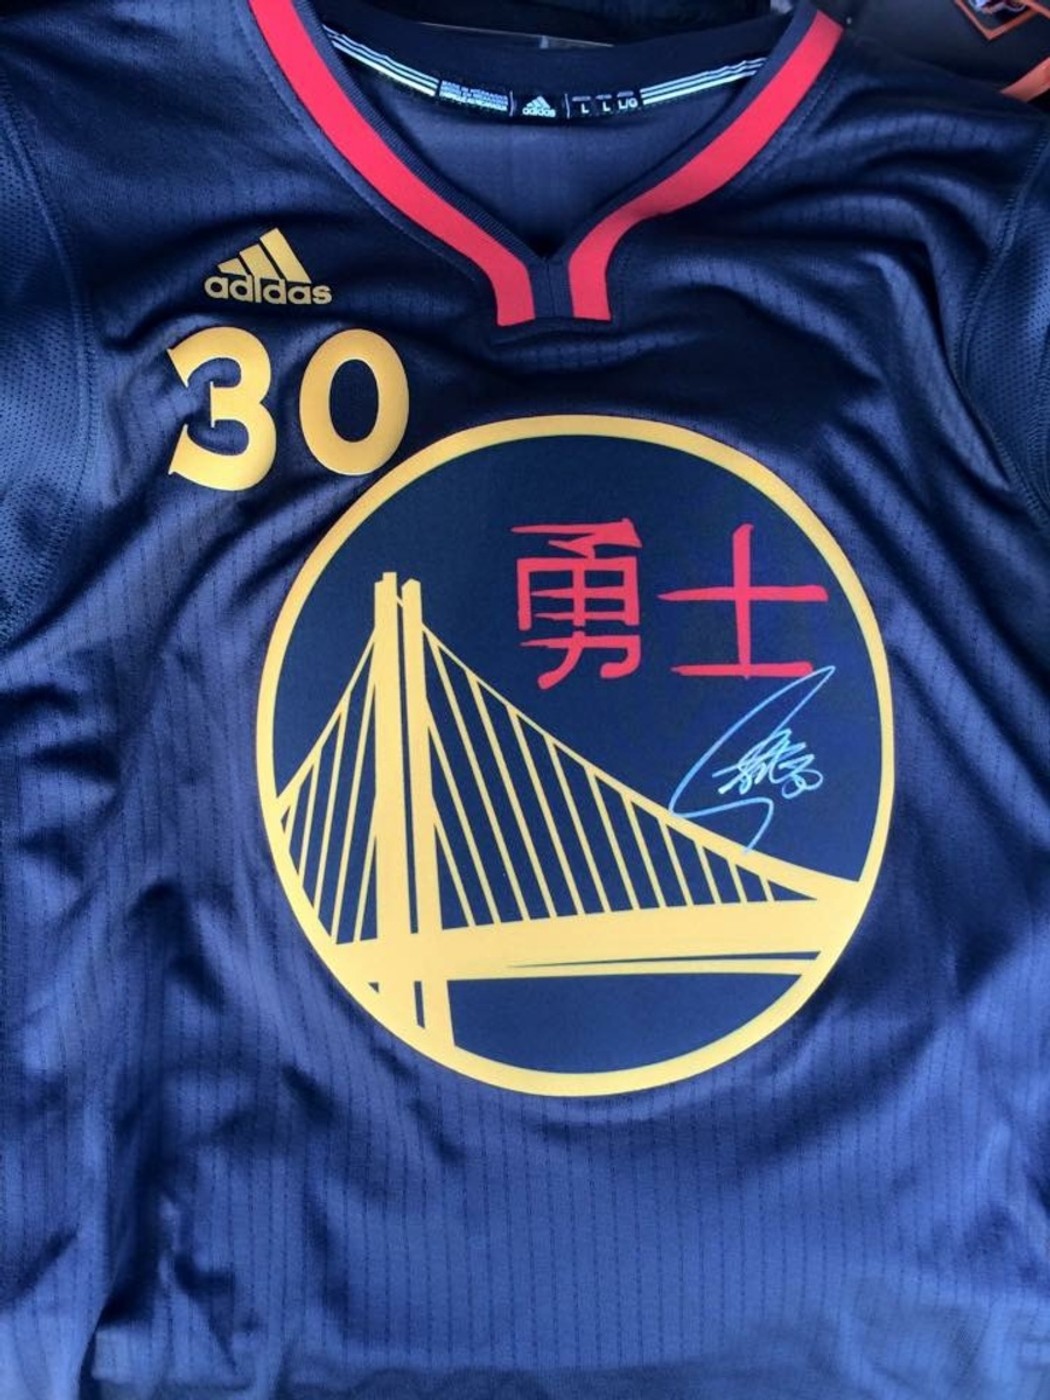 Stephen Curry Autographed Golden State Warriors adidas Chinese New